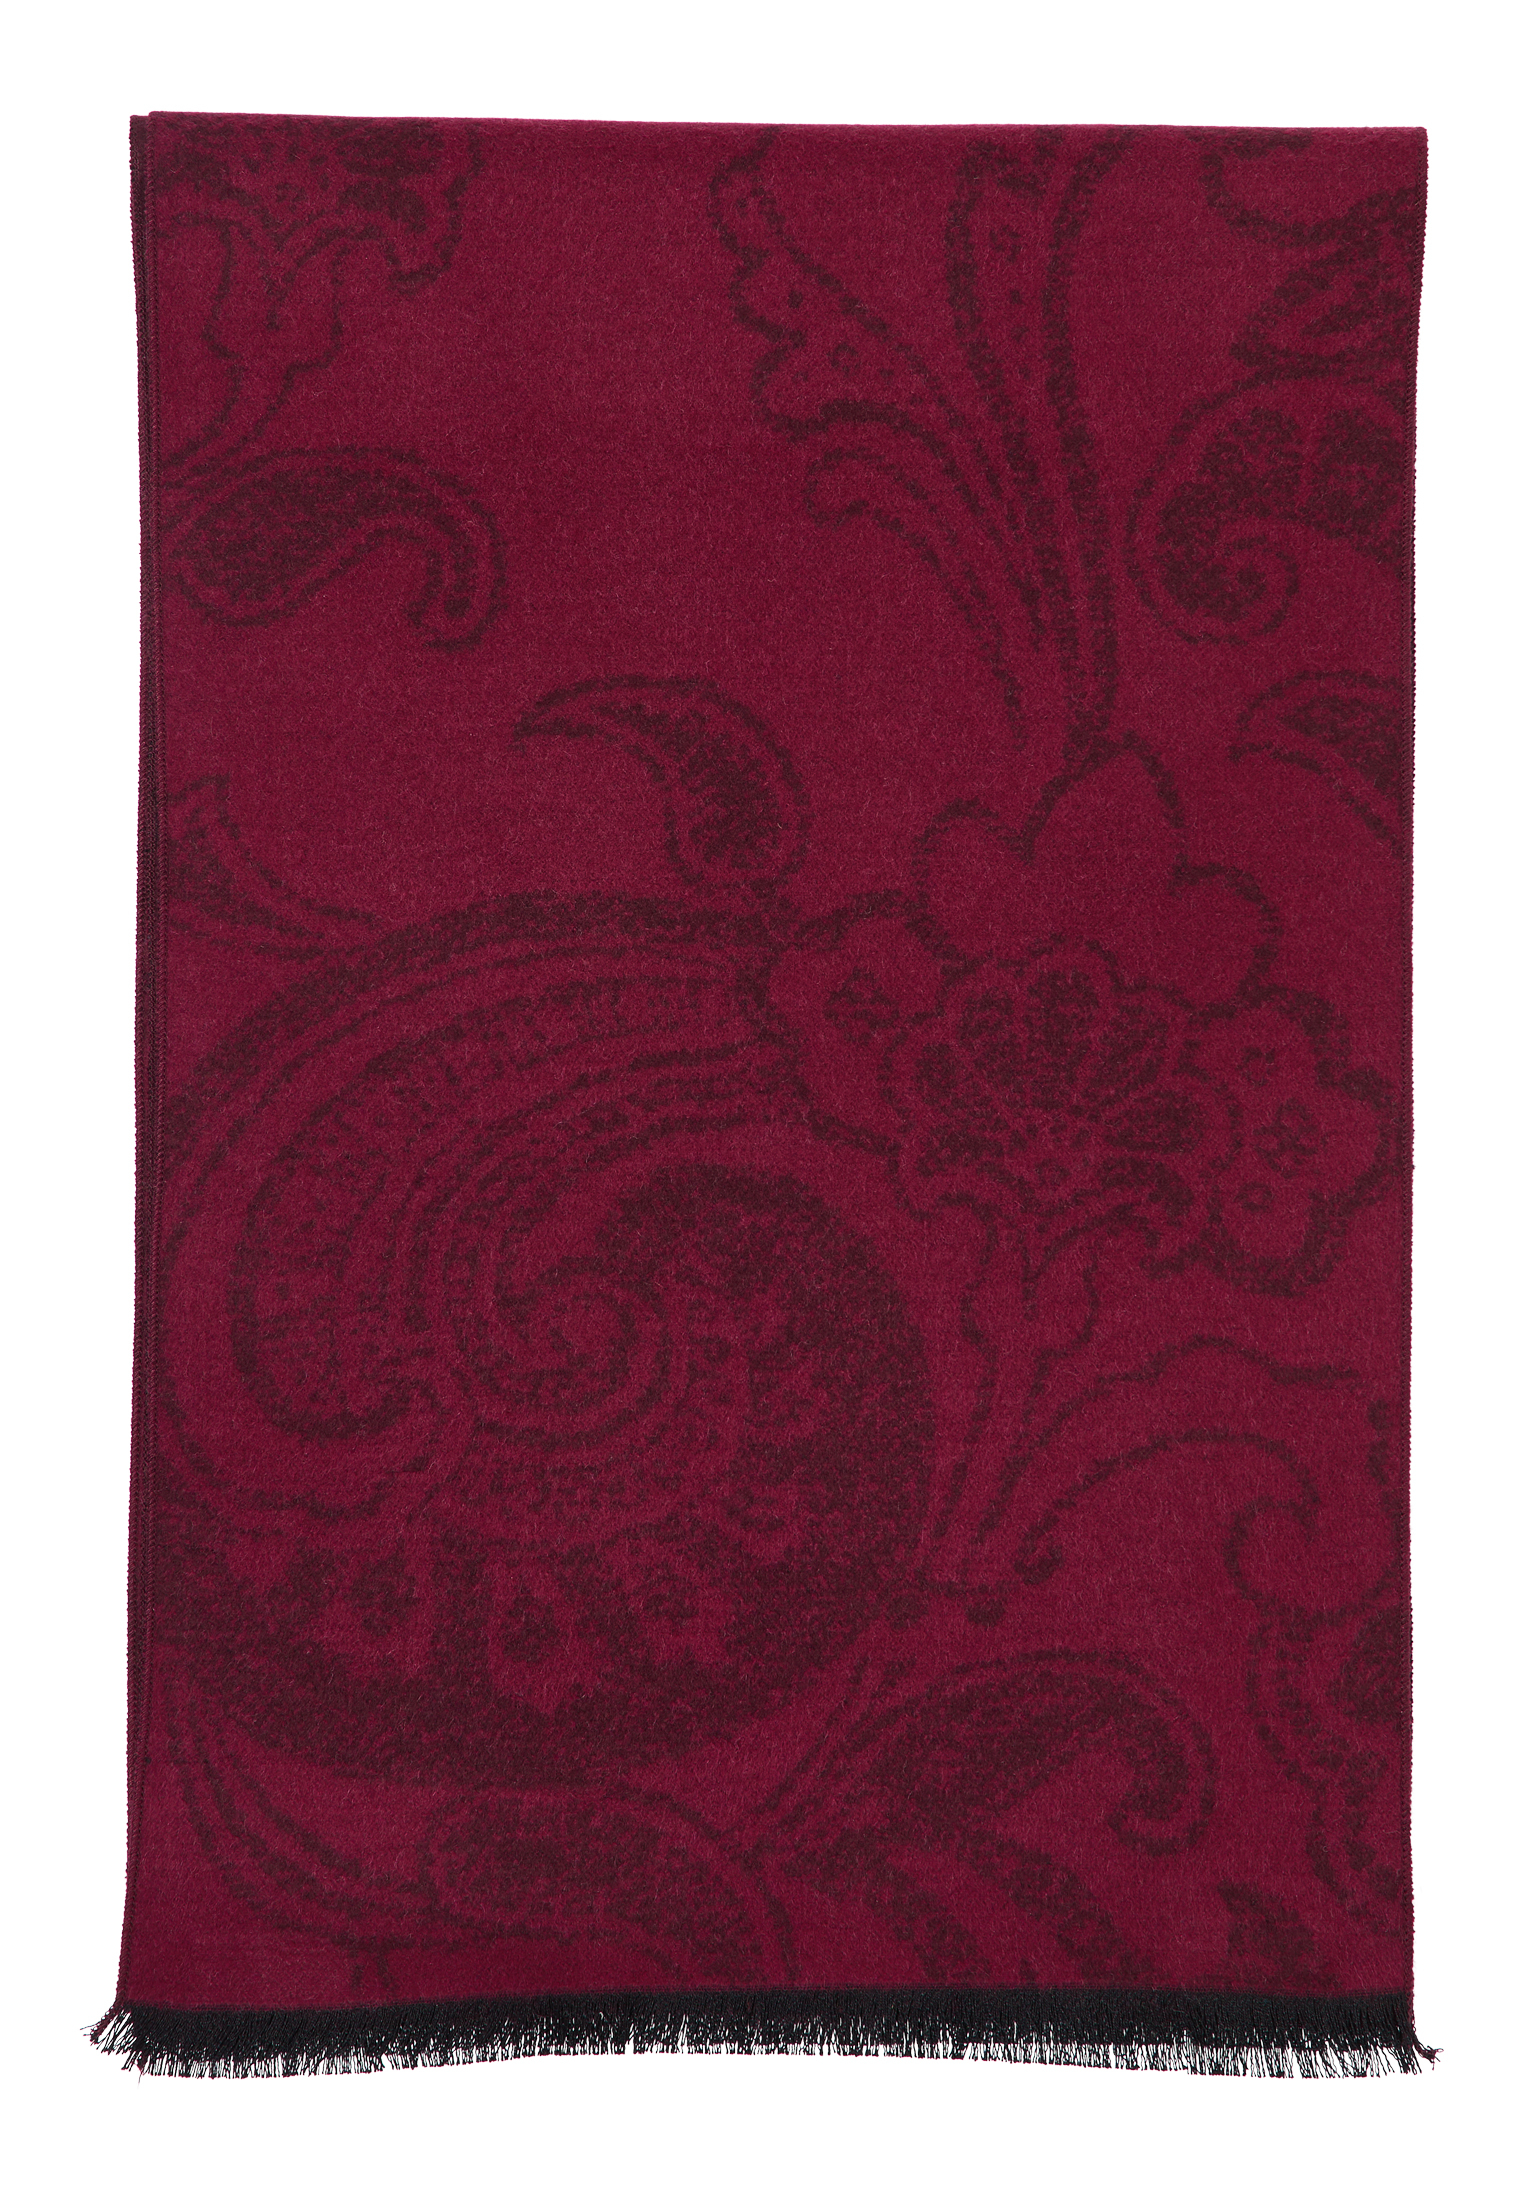 Scarf in burgundy patterned